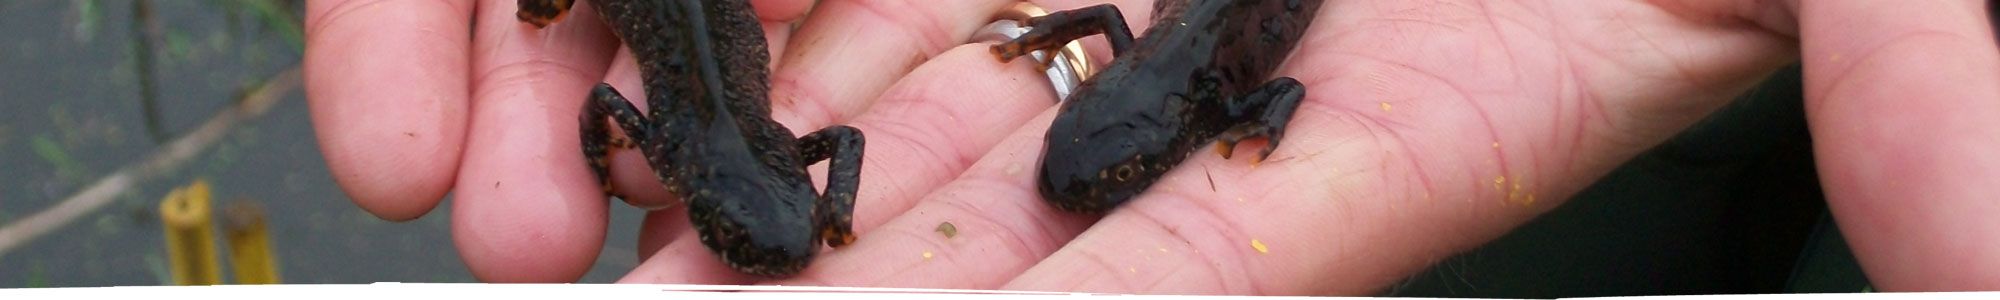 Newts found near Chester being held in hands